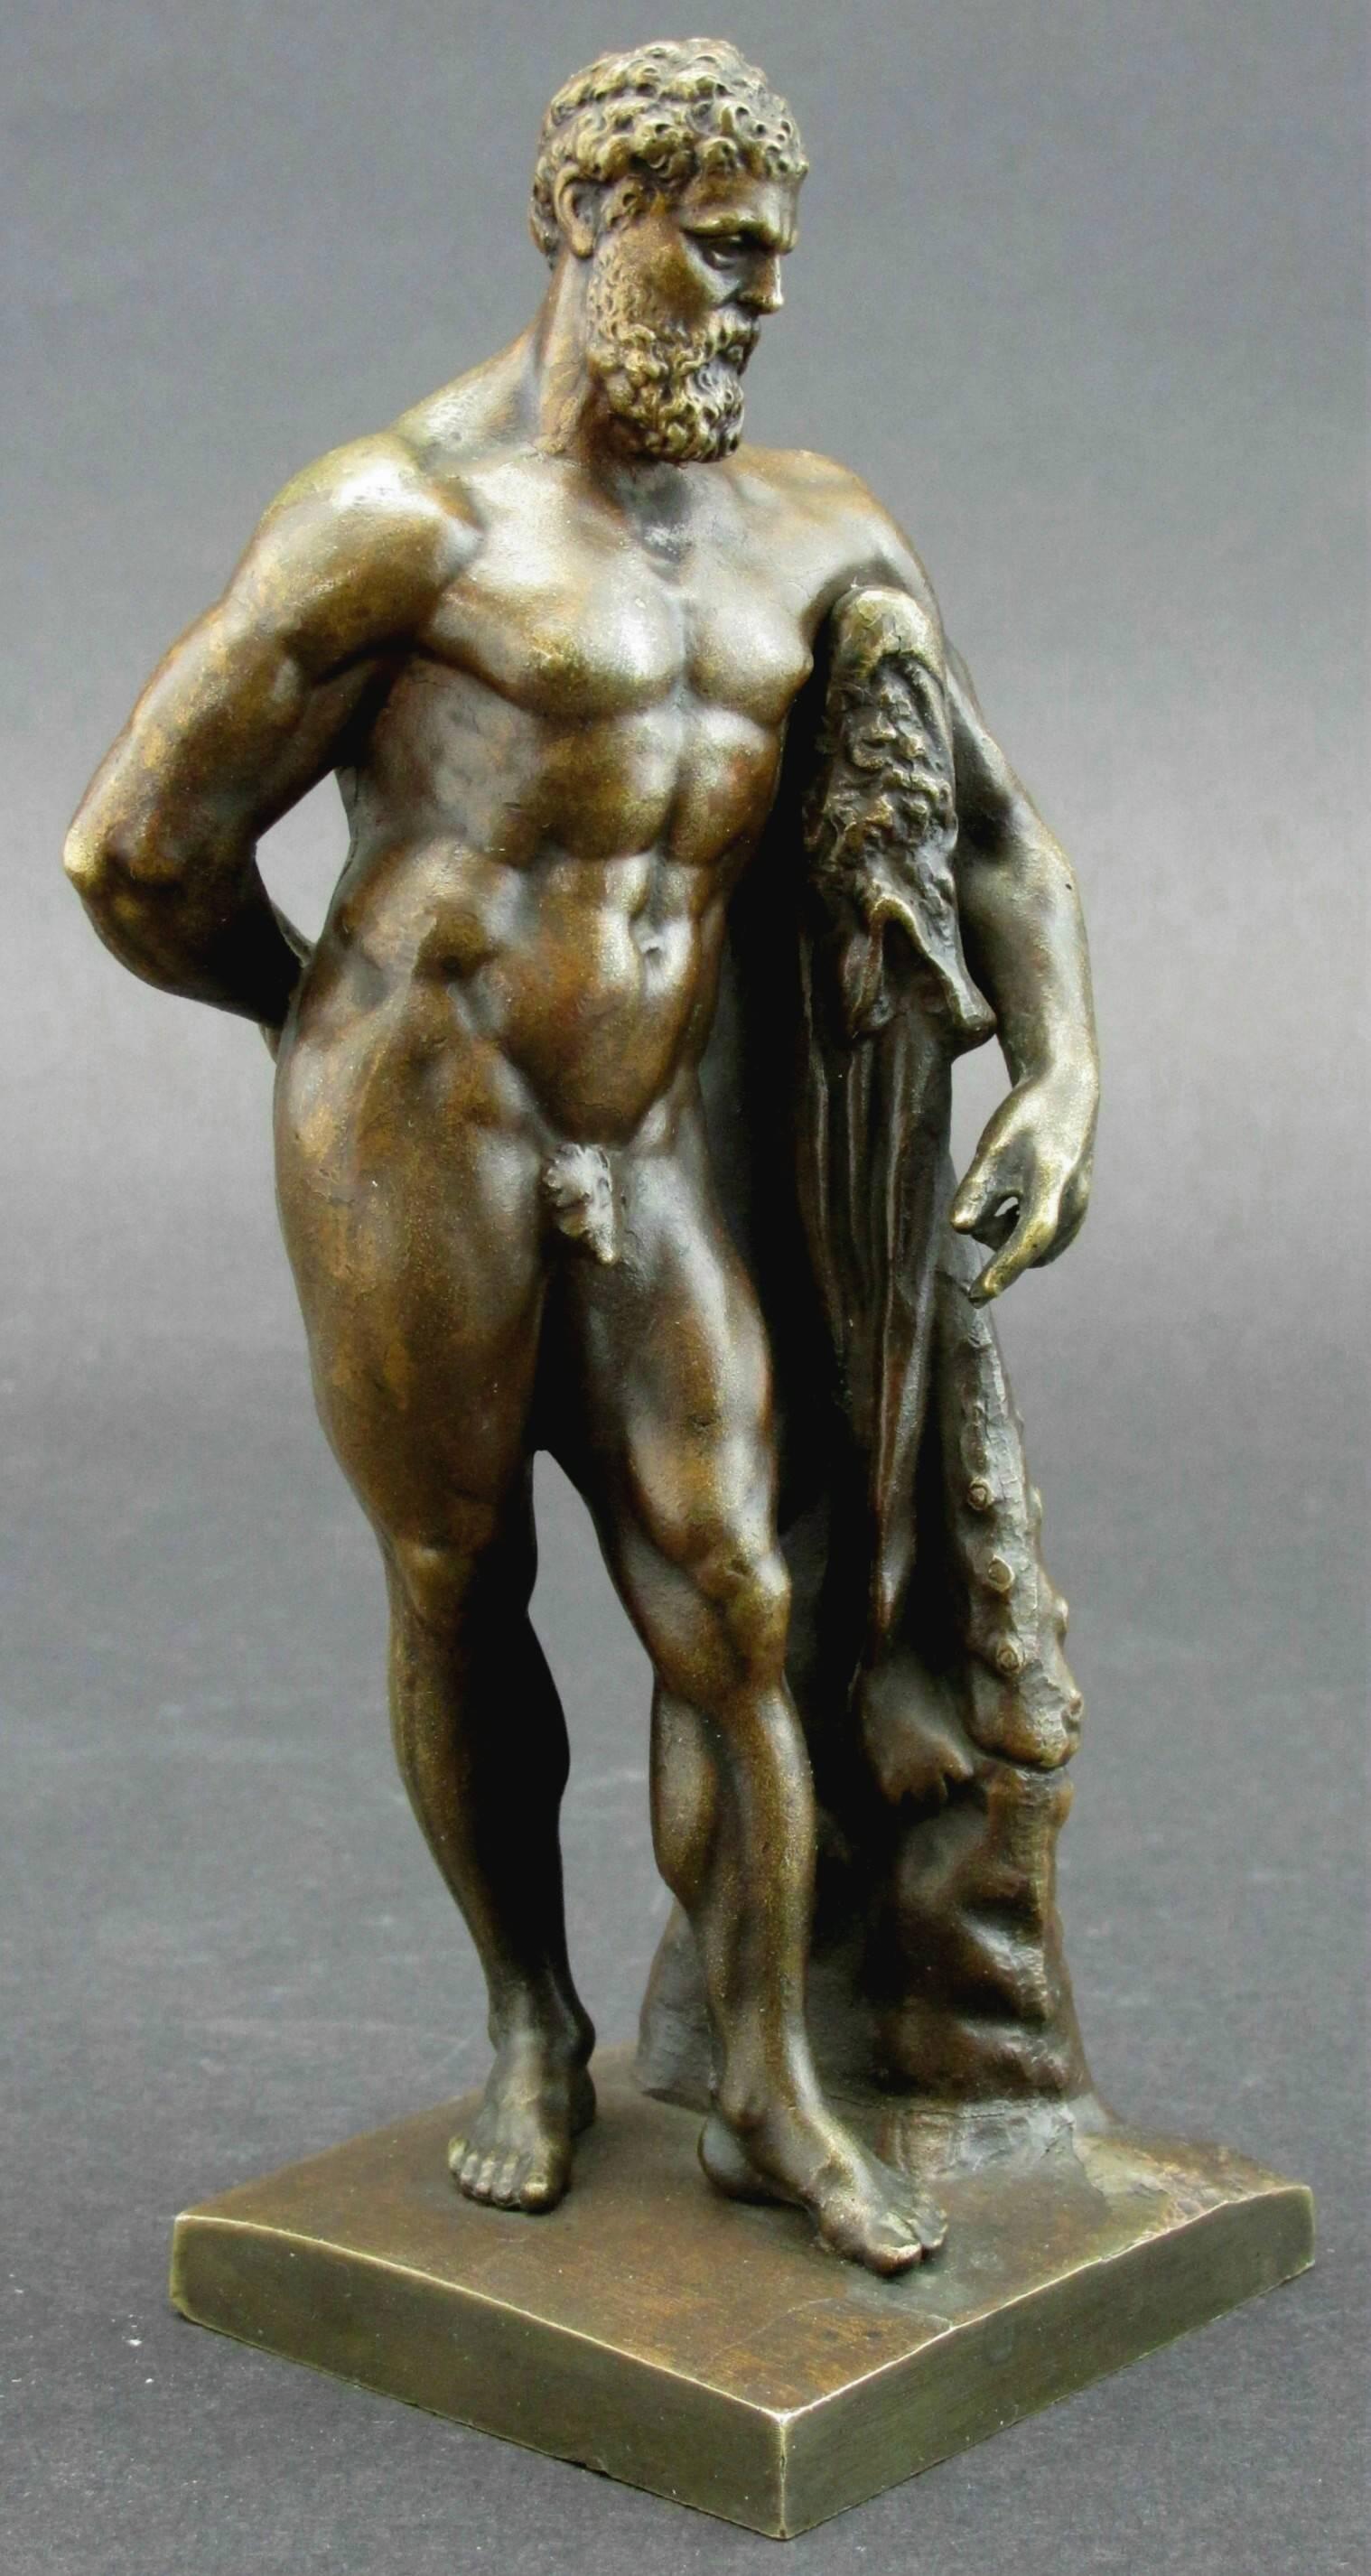 A finely executed full length bronze of the Farnese Hercules shown resting upon the skin of the Nemean Lion draped over his club, behind him he clutches the Apples of Hesperides in his right hand. Cast in two sections and exhibiting a Fine mellow